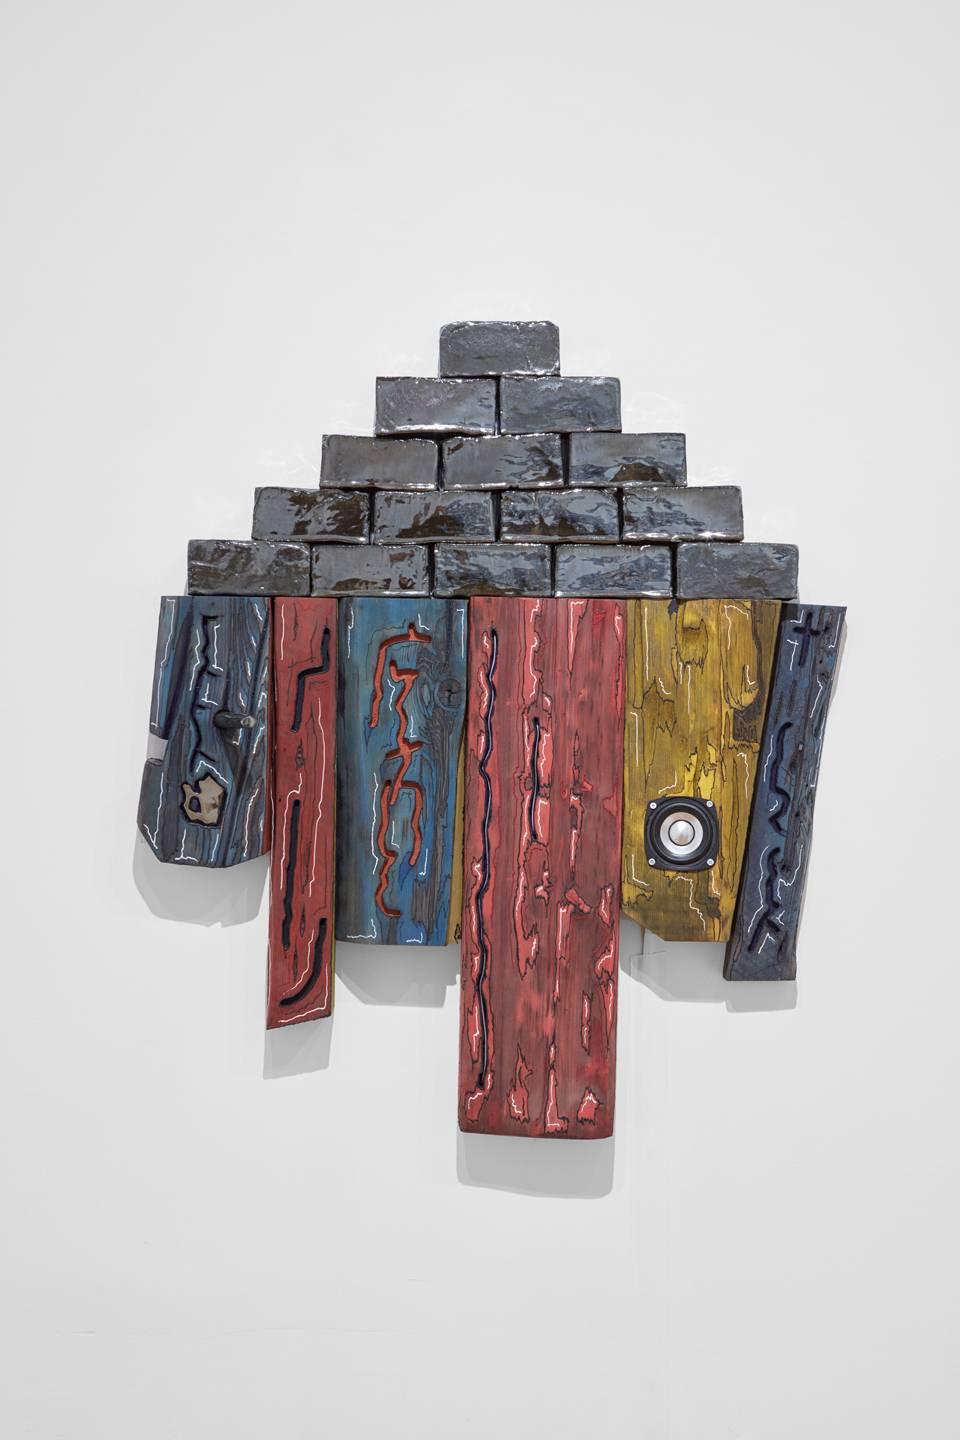 J. Ivcevich Abstract Sculpture - J Ivcevich, Untitled (Bricolage), Abstract wood, ceramic, and polymer sculpture